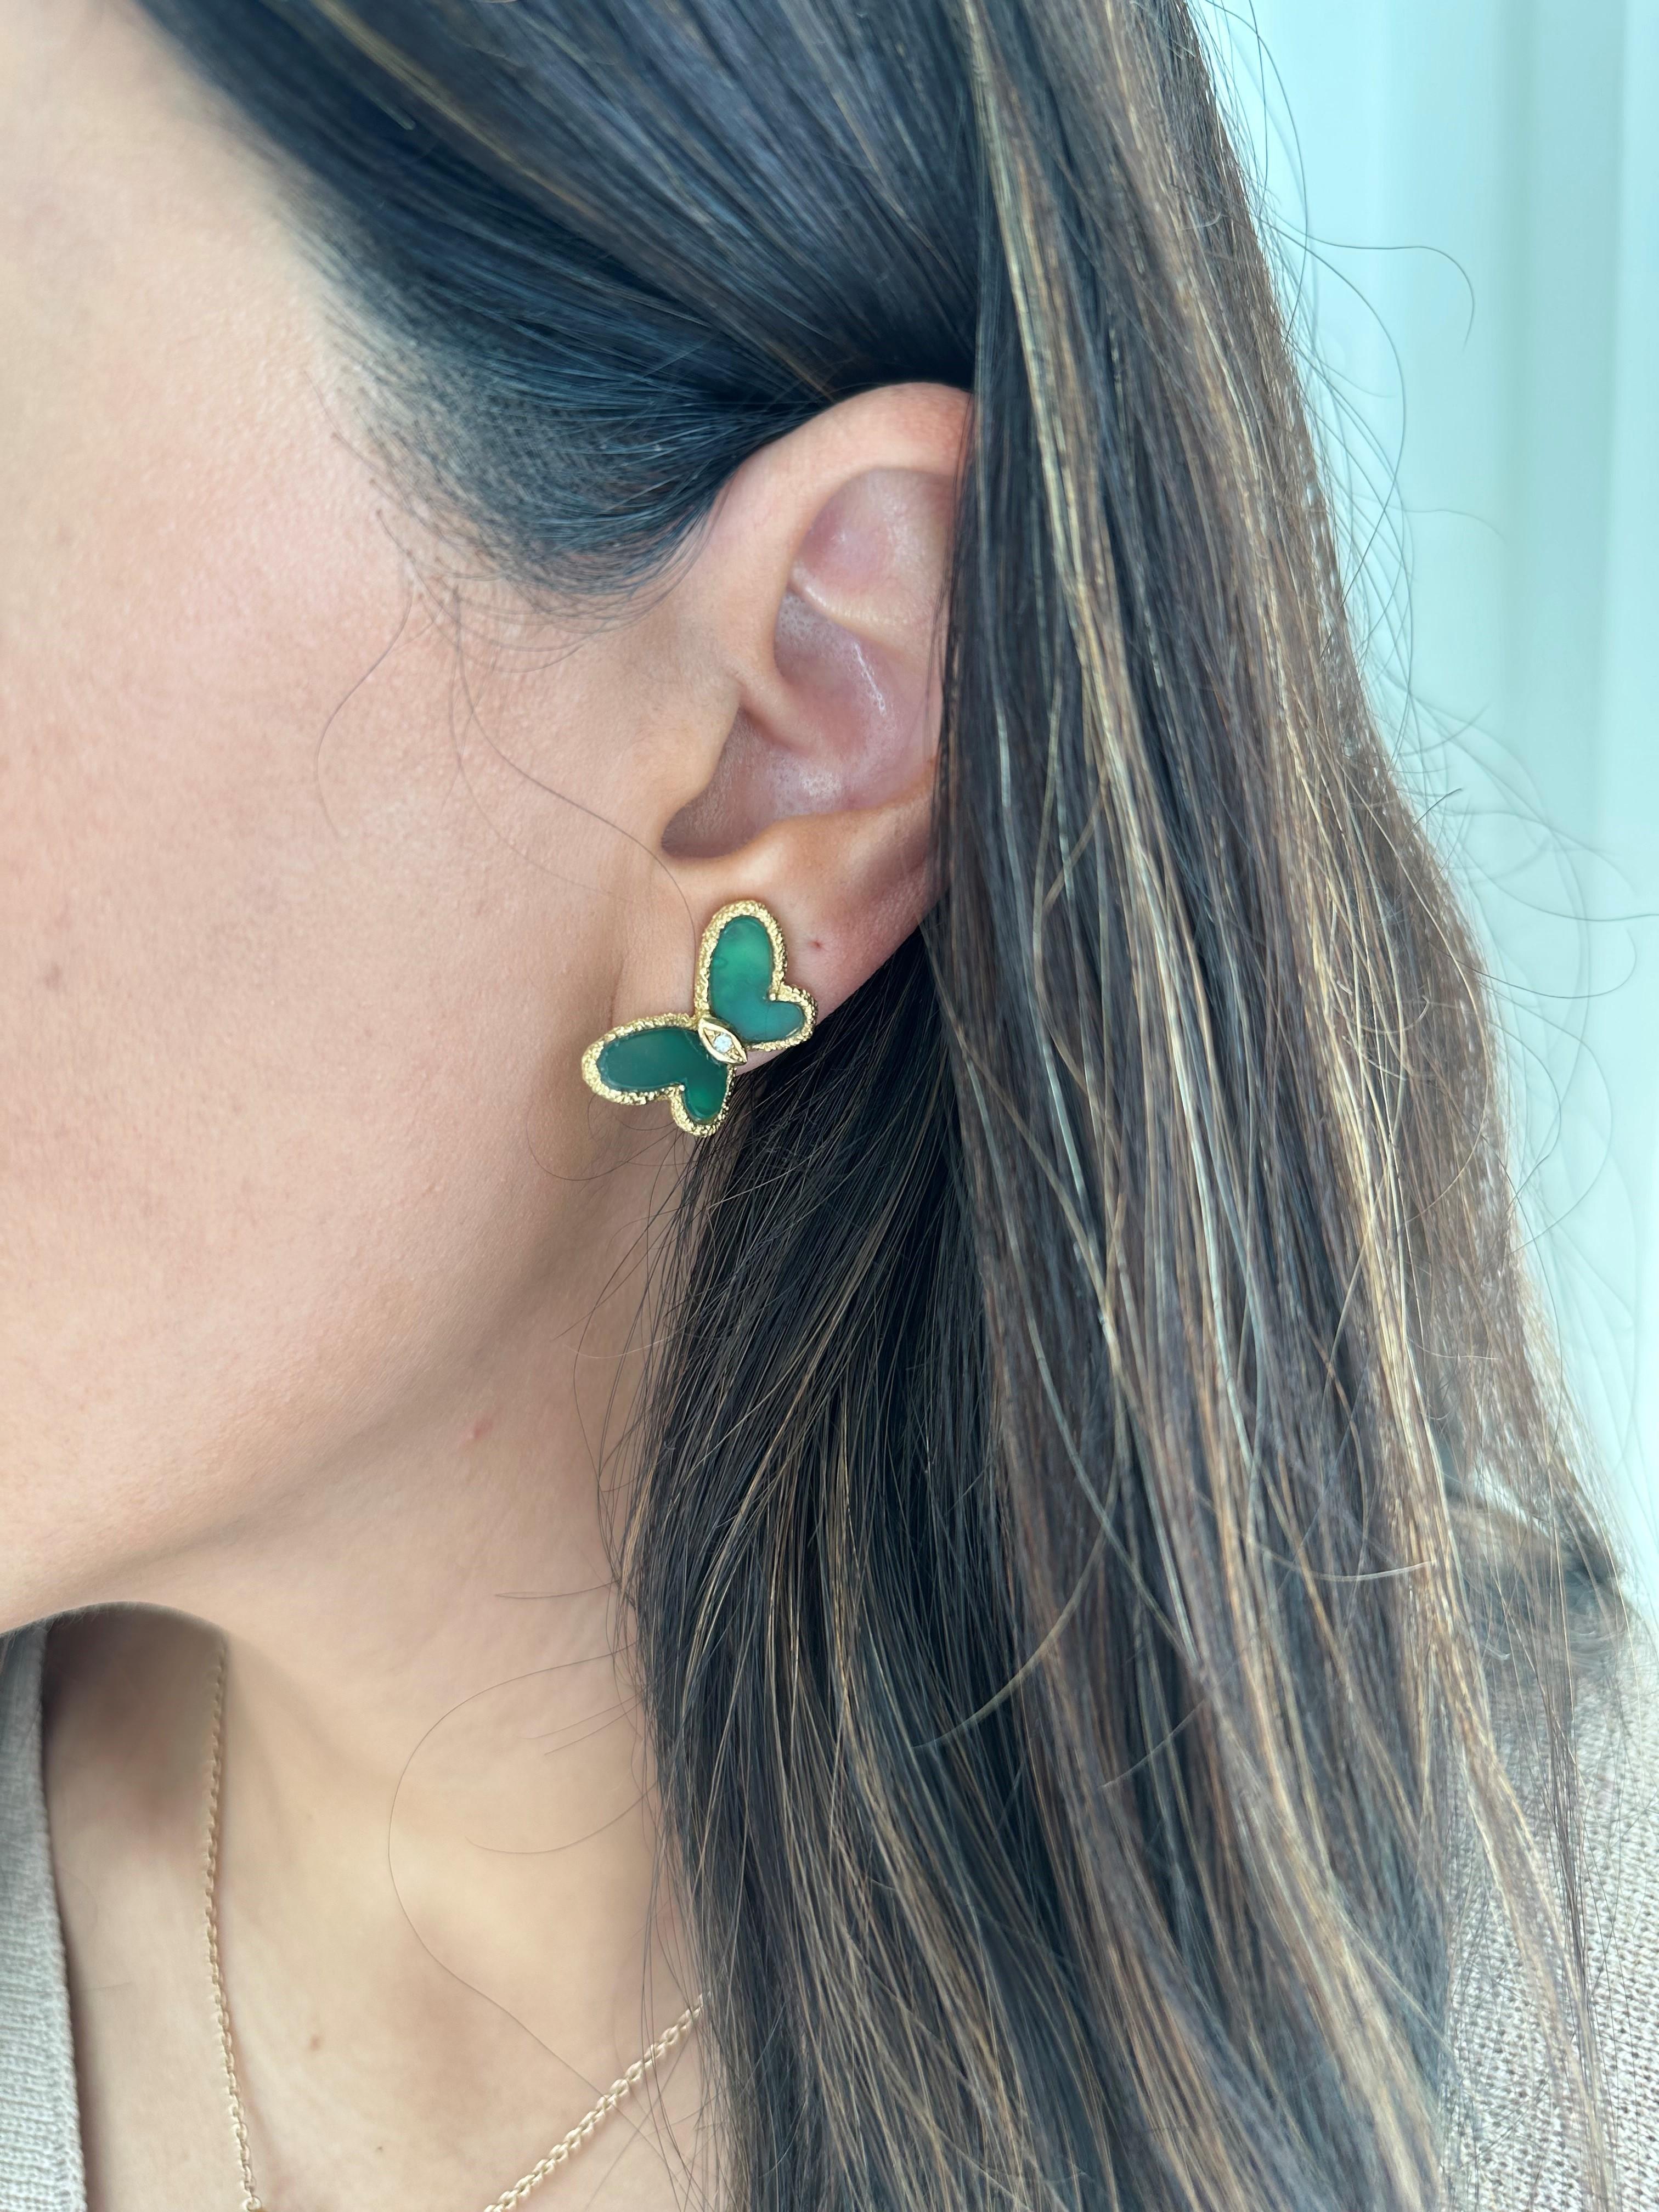 Behold a masterpiece from Van Cleef & Arpels' iconic Butterfly Collection, a pair of earrings from the early 2000s. Crafted in 18k yellow gold, these earrings feature textured gold wings, adorned with plaques of green chalcedony and brilliant-cut